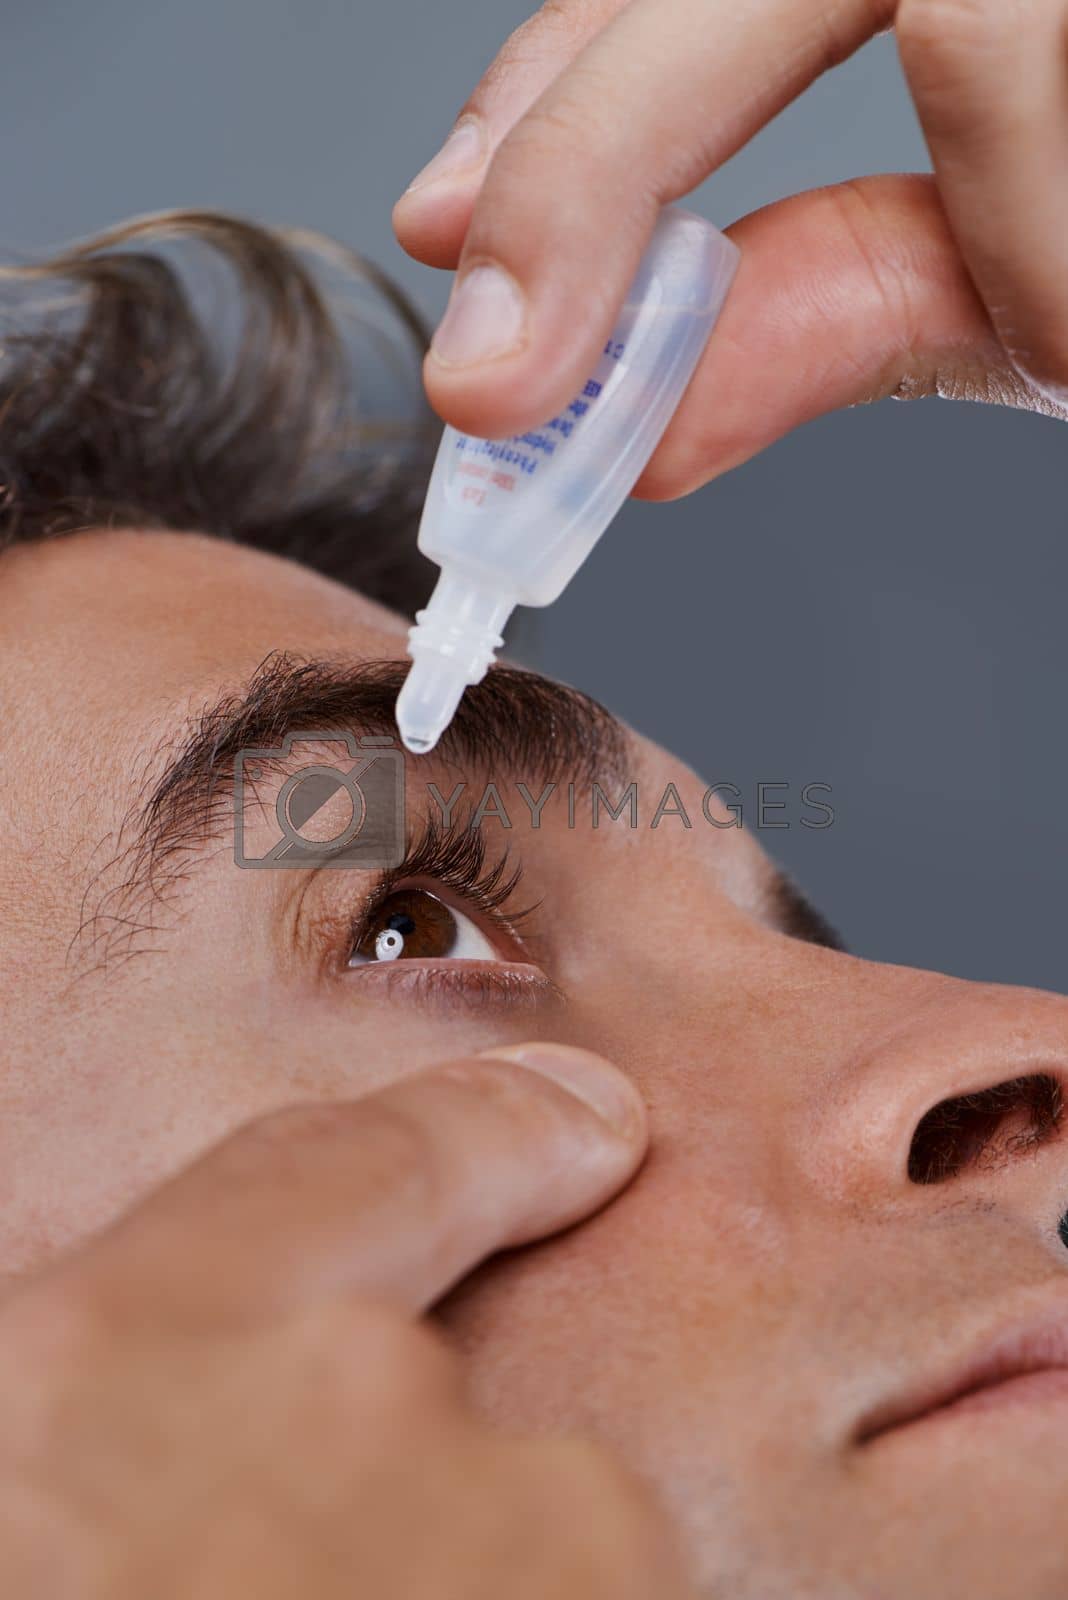 Royalty free image of Keeping his eyes clear. Studio shot of a young man putting drops into his eye. by YuriArcurs